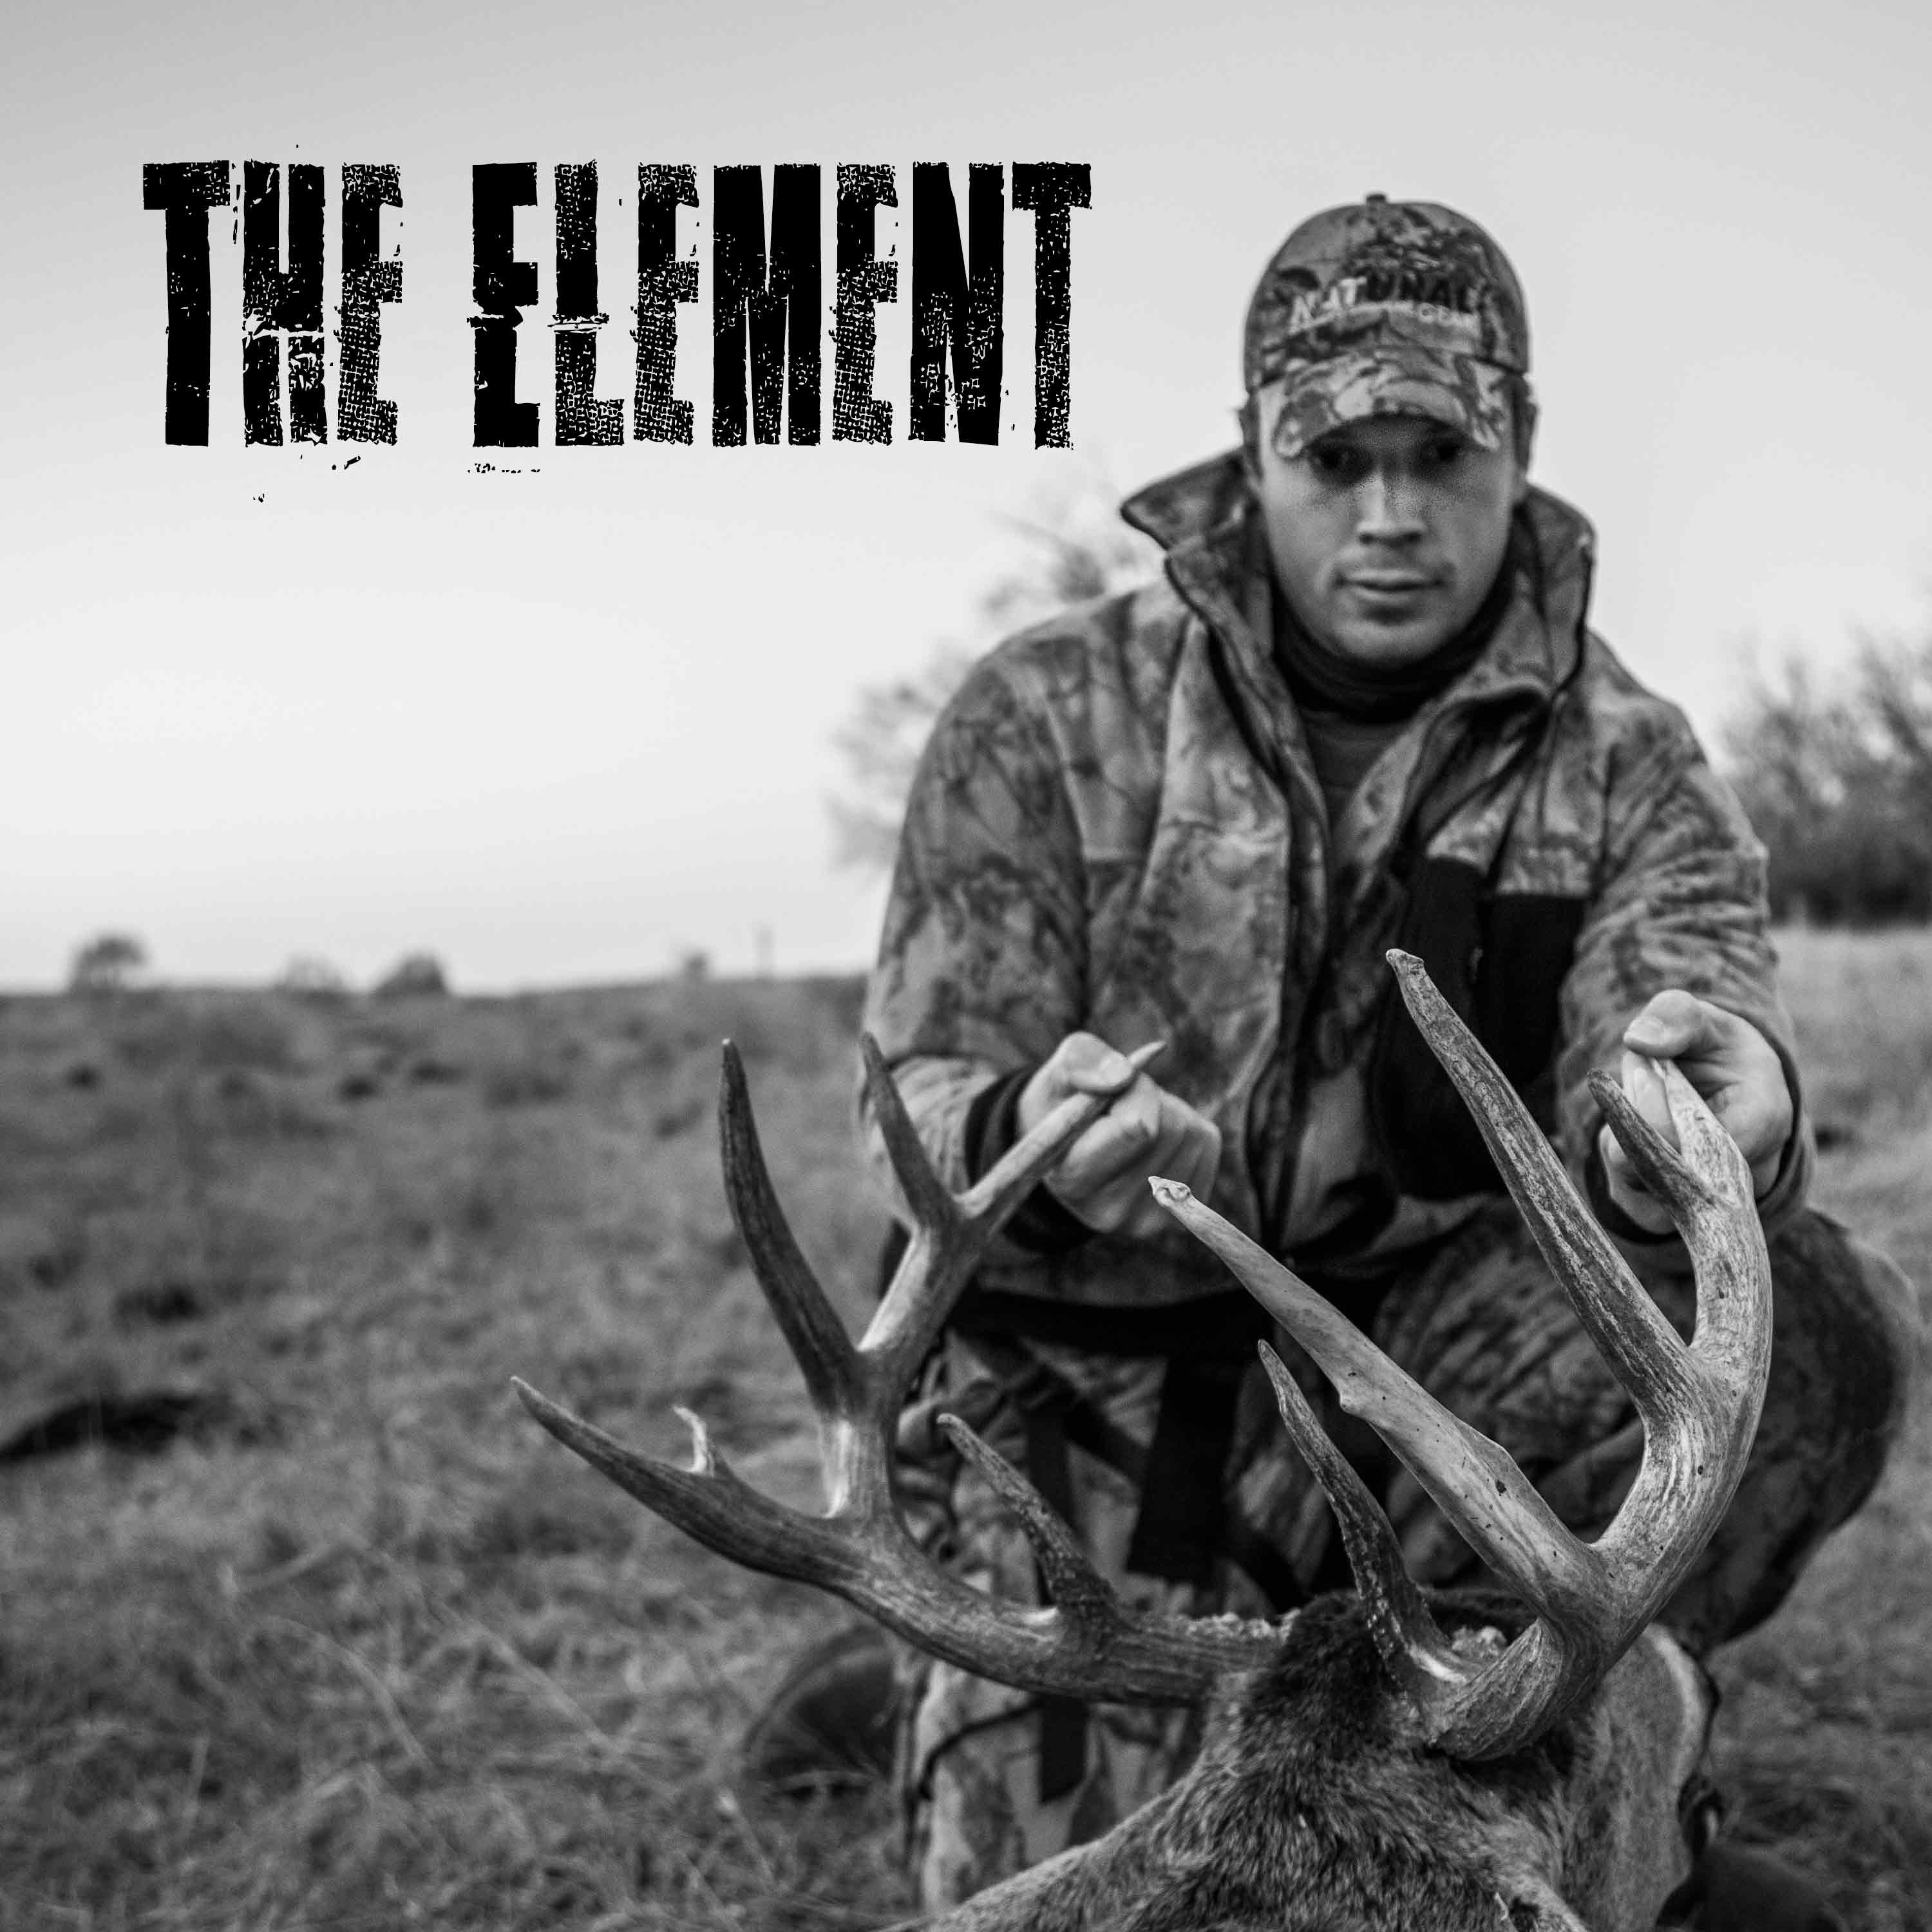 BIG BUCK BREAKDOWN! (feat. Sam Hogan and The Story of The Subdivision Stud Whitetail, A Challenging Recovery, Evaluating Shot Placement on Deer)